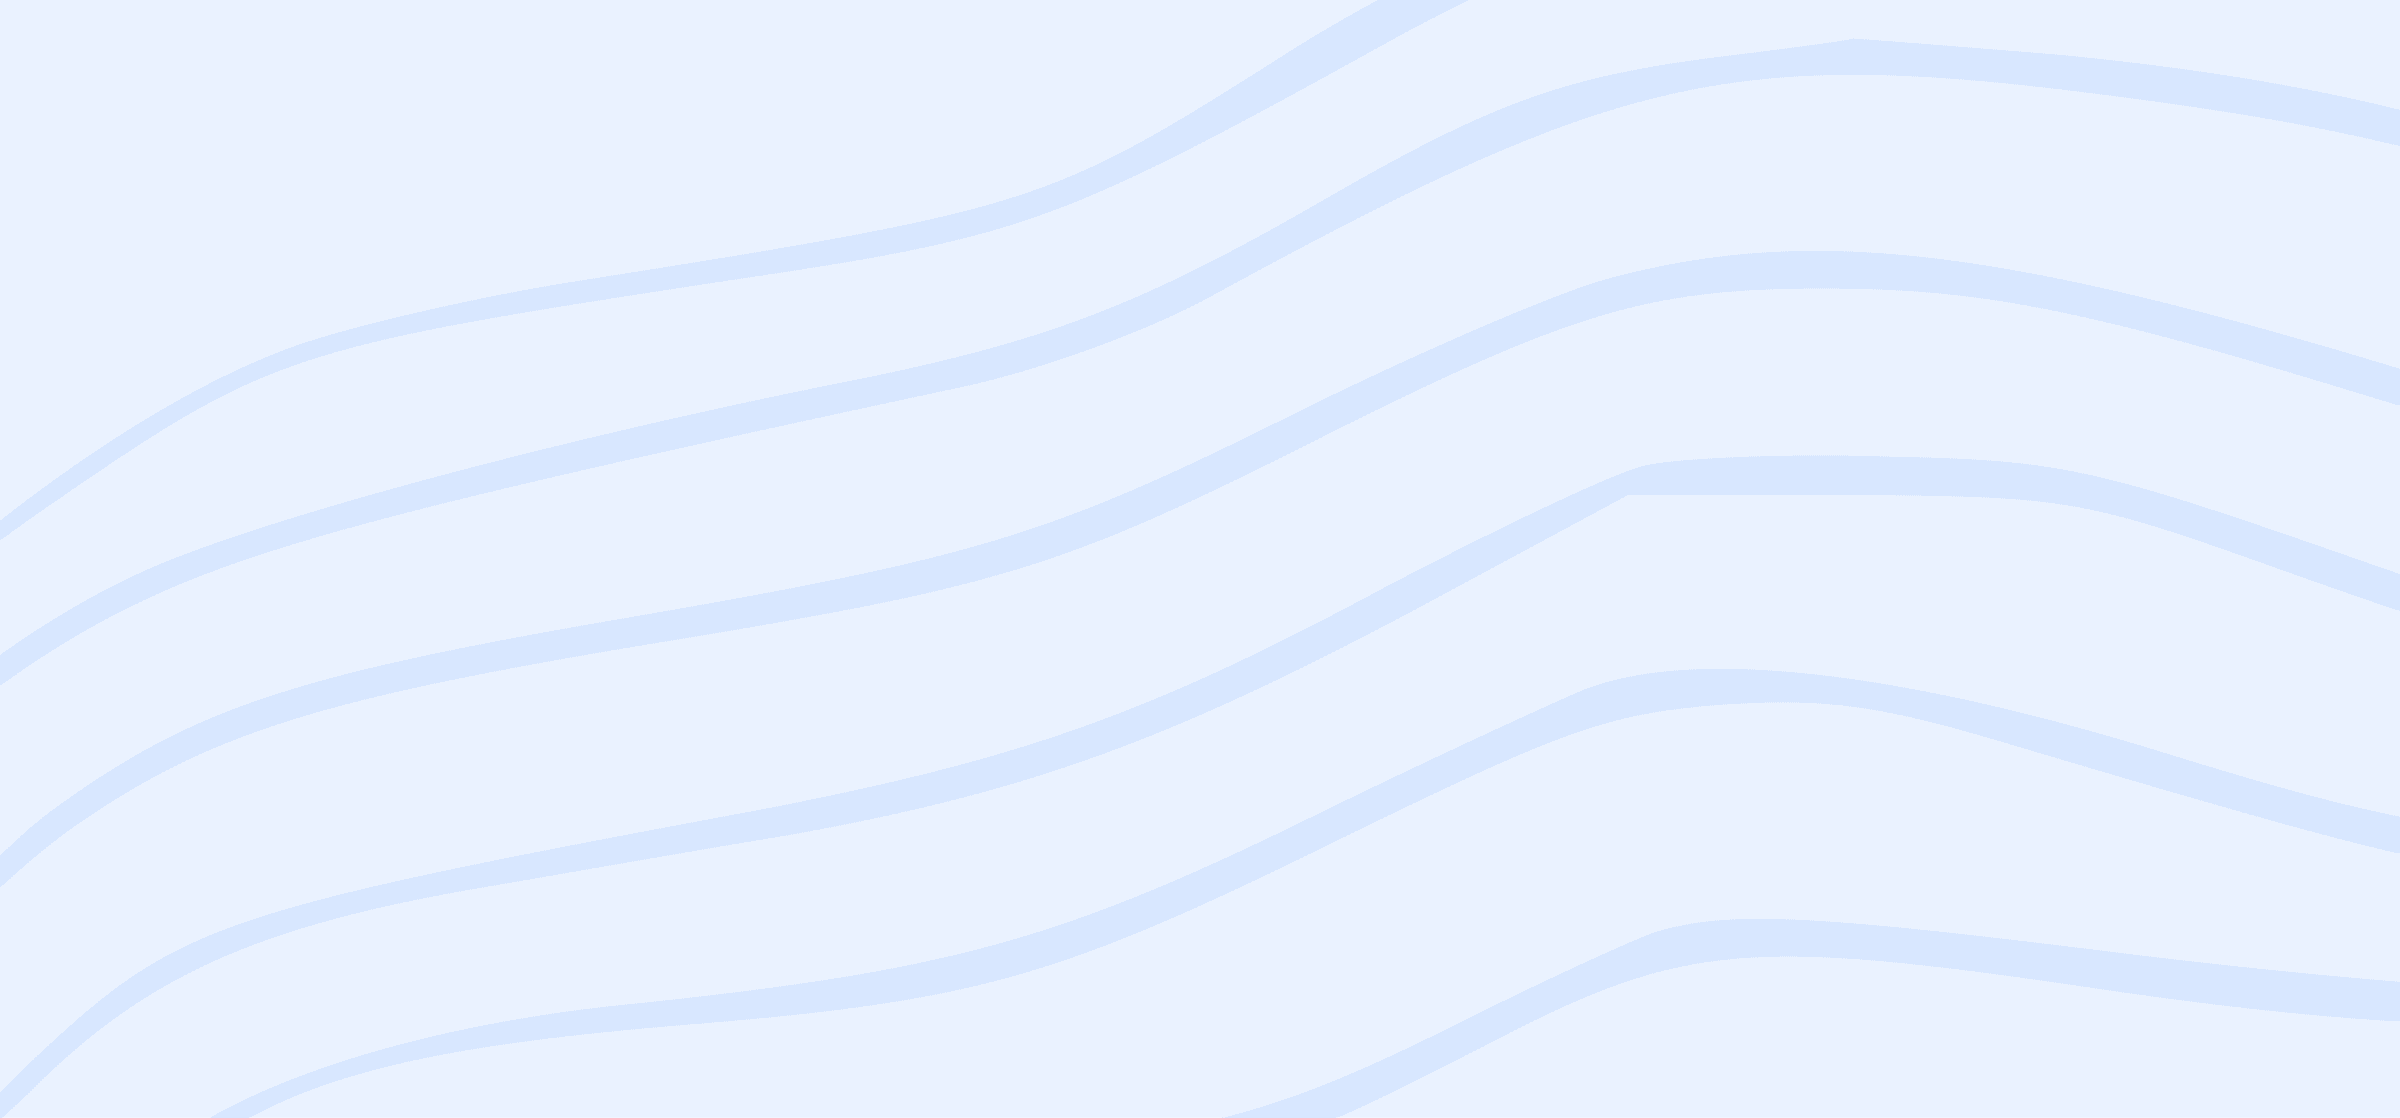 Wavy lines on a blue background.